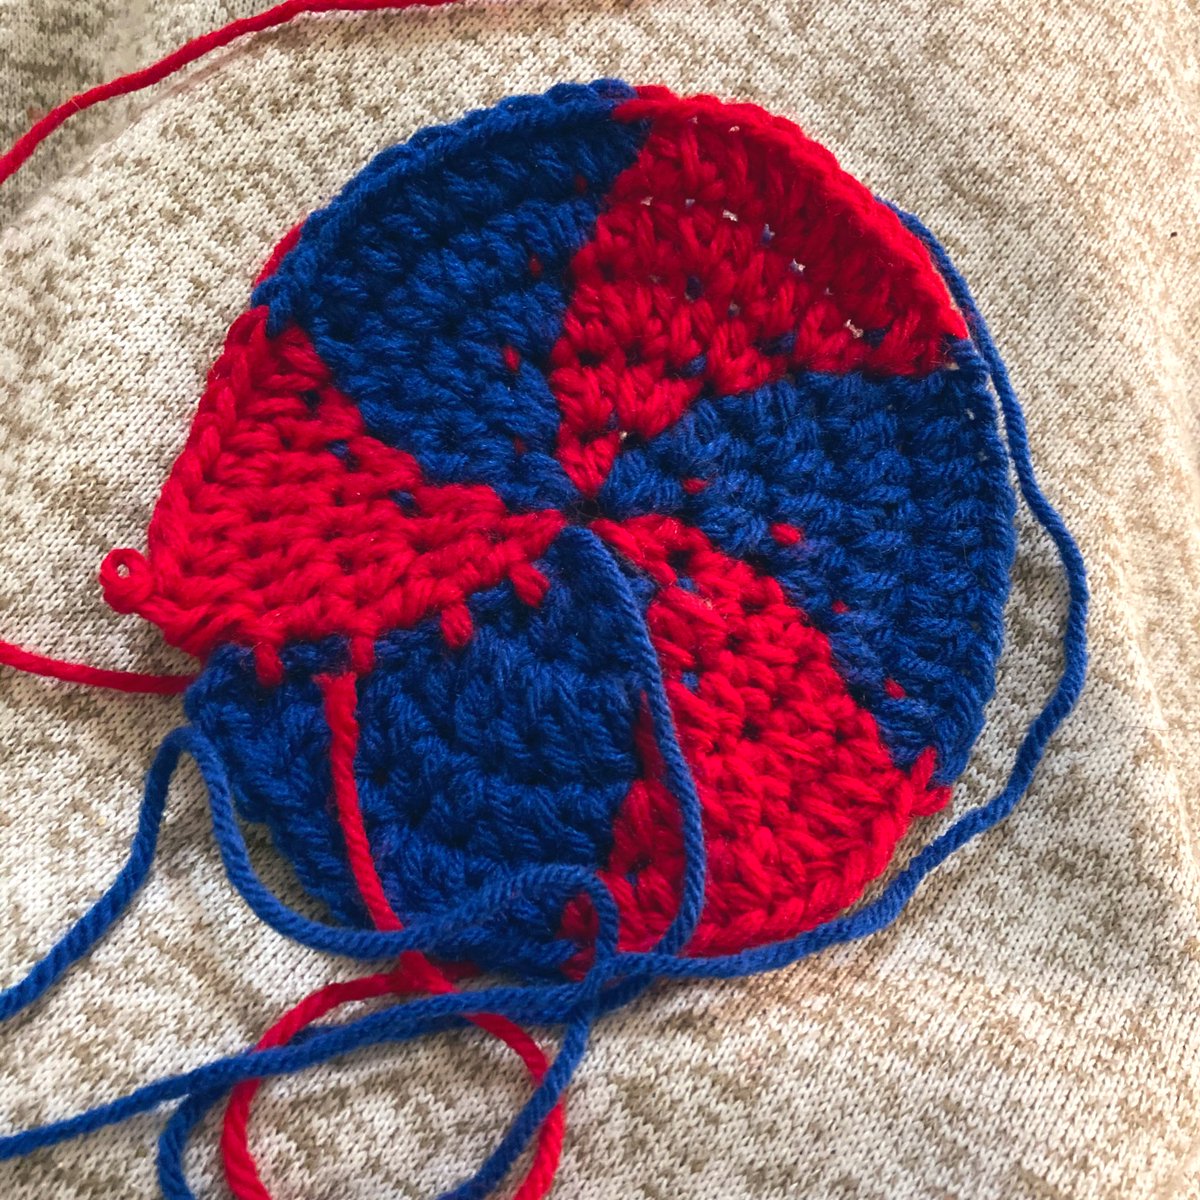 help i made a spider-man bucket hat base https://t.co/4s05LO1T1b